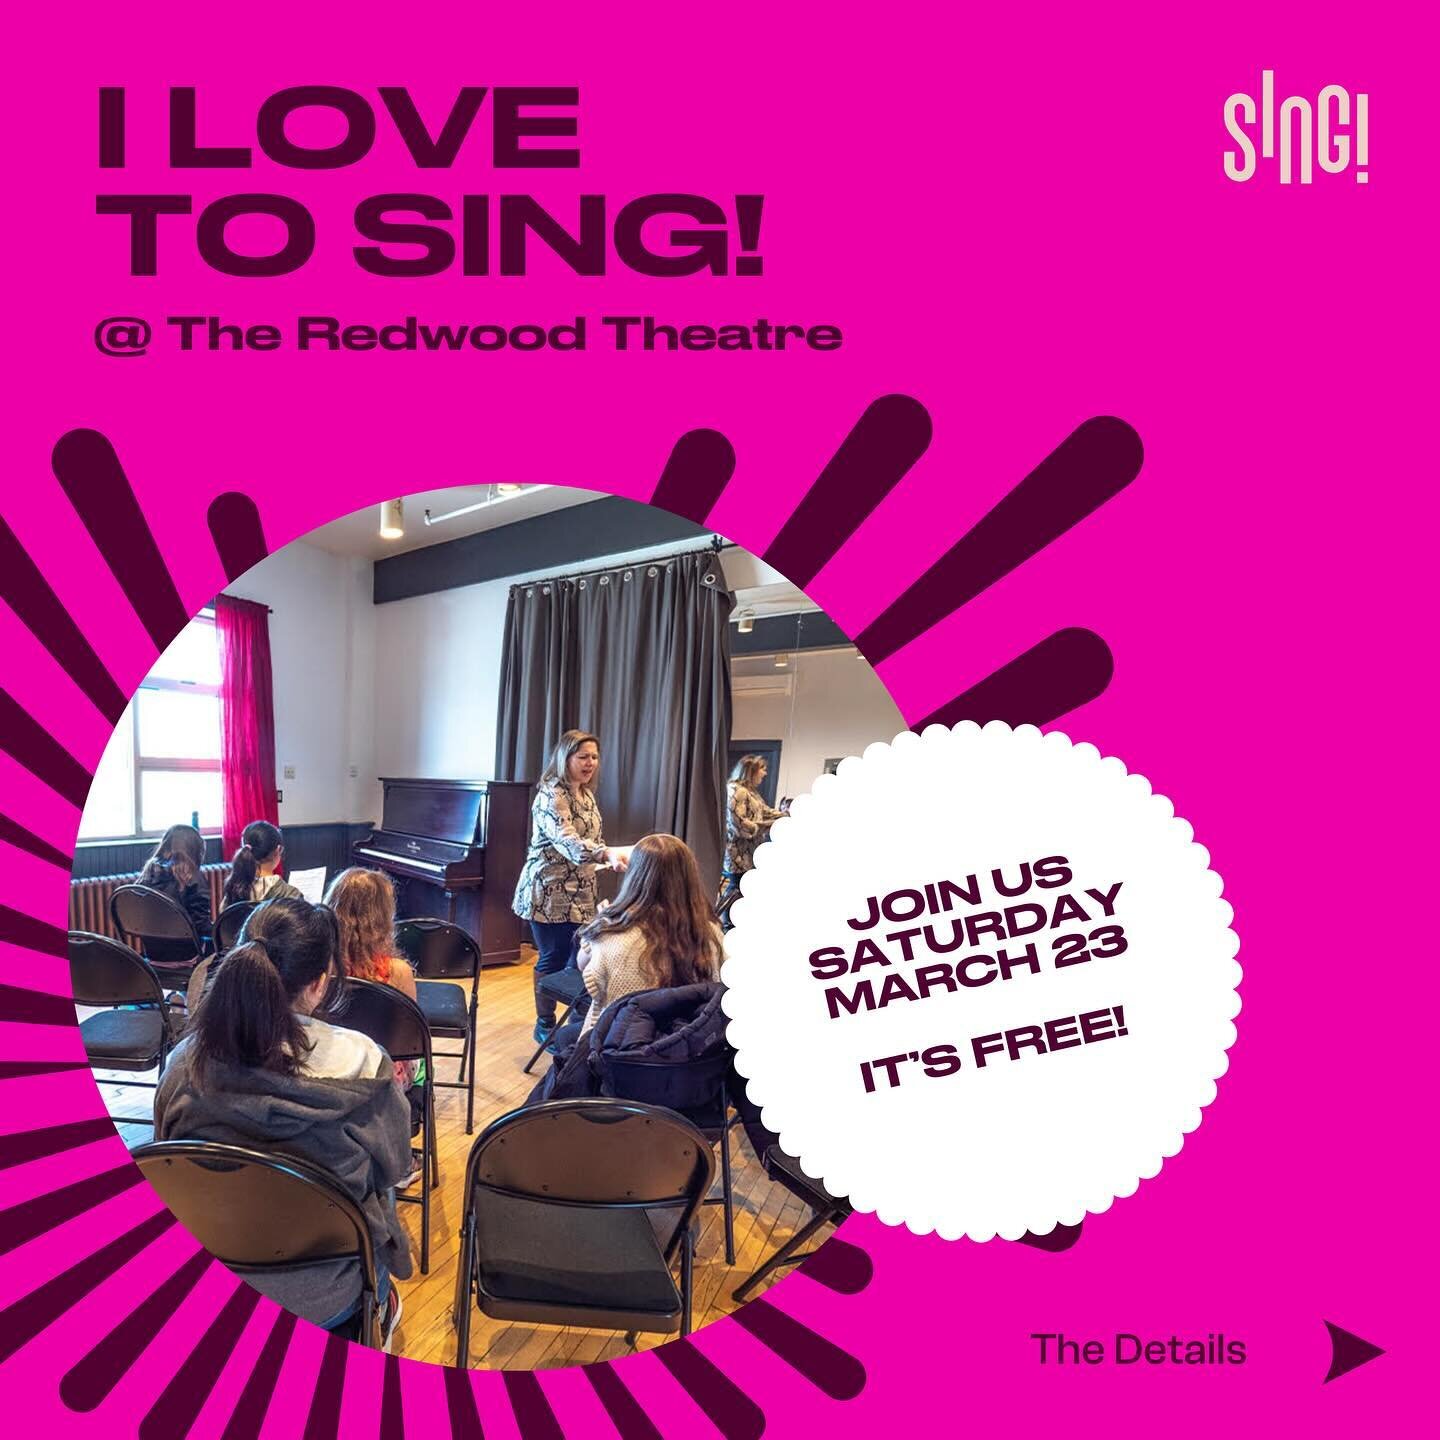 📣 Attention all young singers! 📣
(and parents of young singers!!!)

The SING! Festival is offering vocal workshops for young singers (recommended for ages 10-17) COMPLETELY FREE as part of our &ldquo;I love to SING&rdquo; program running now throug